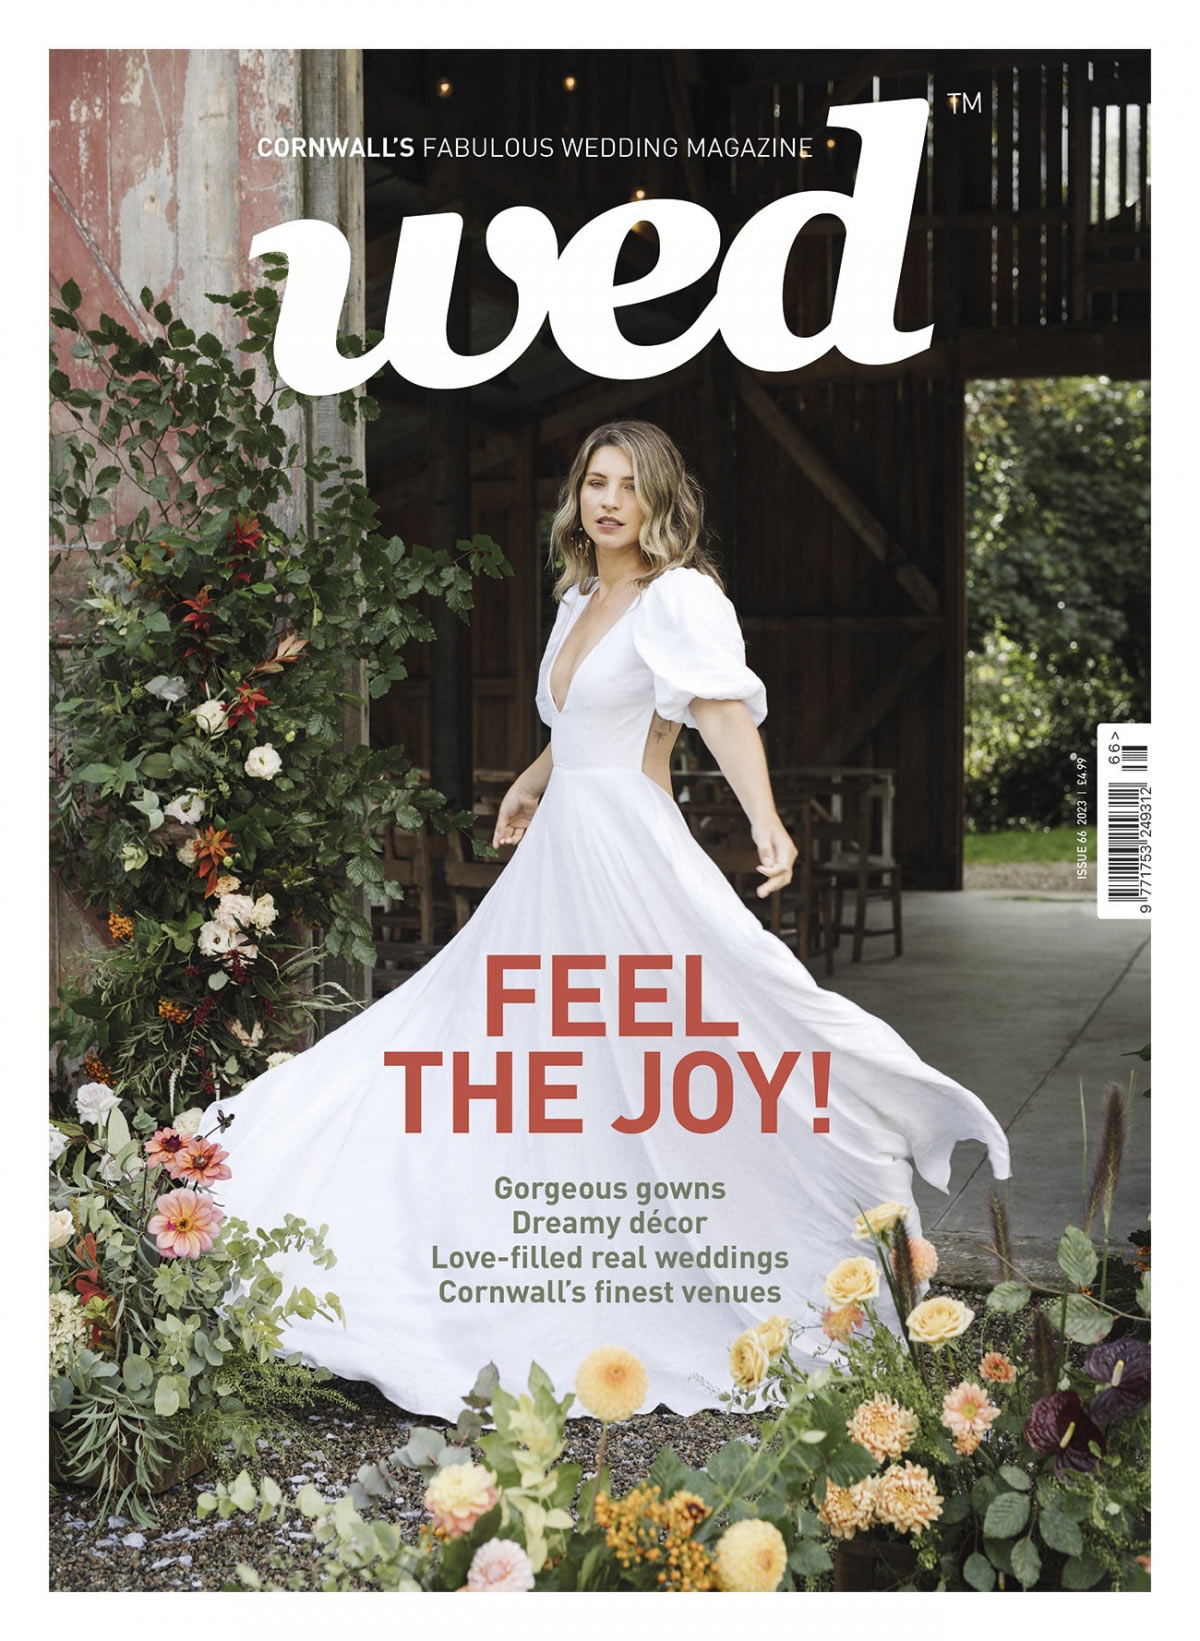 New Cornwall issue out now!